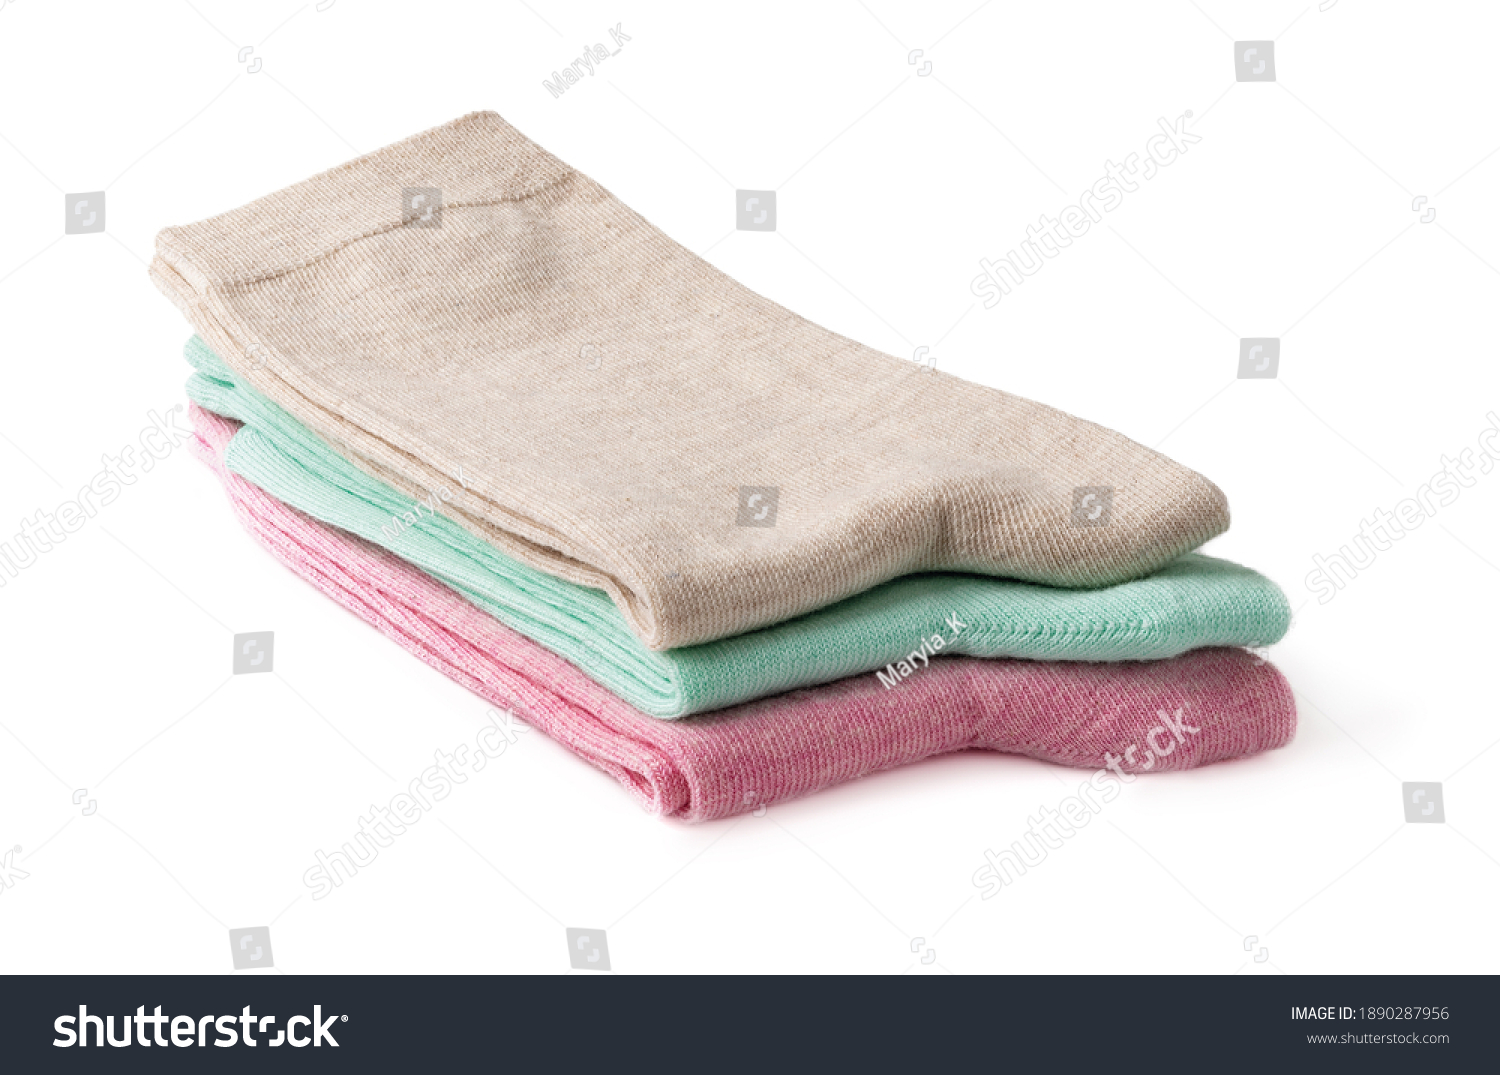 Stack of new tall colorful socks isolated on a white background. Three pairs of beige, green and pink socks folded in half. Elastic cotton hosiery. Full depth of field. Front view. #1890287956